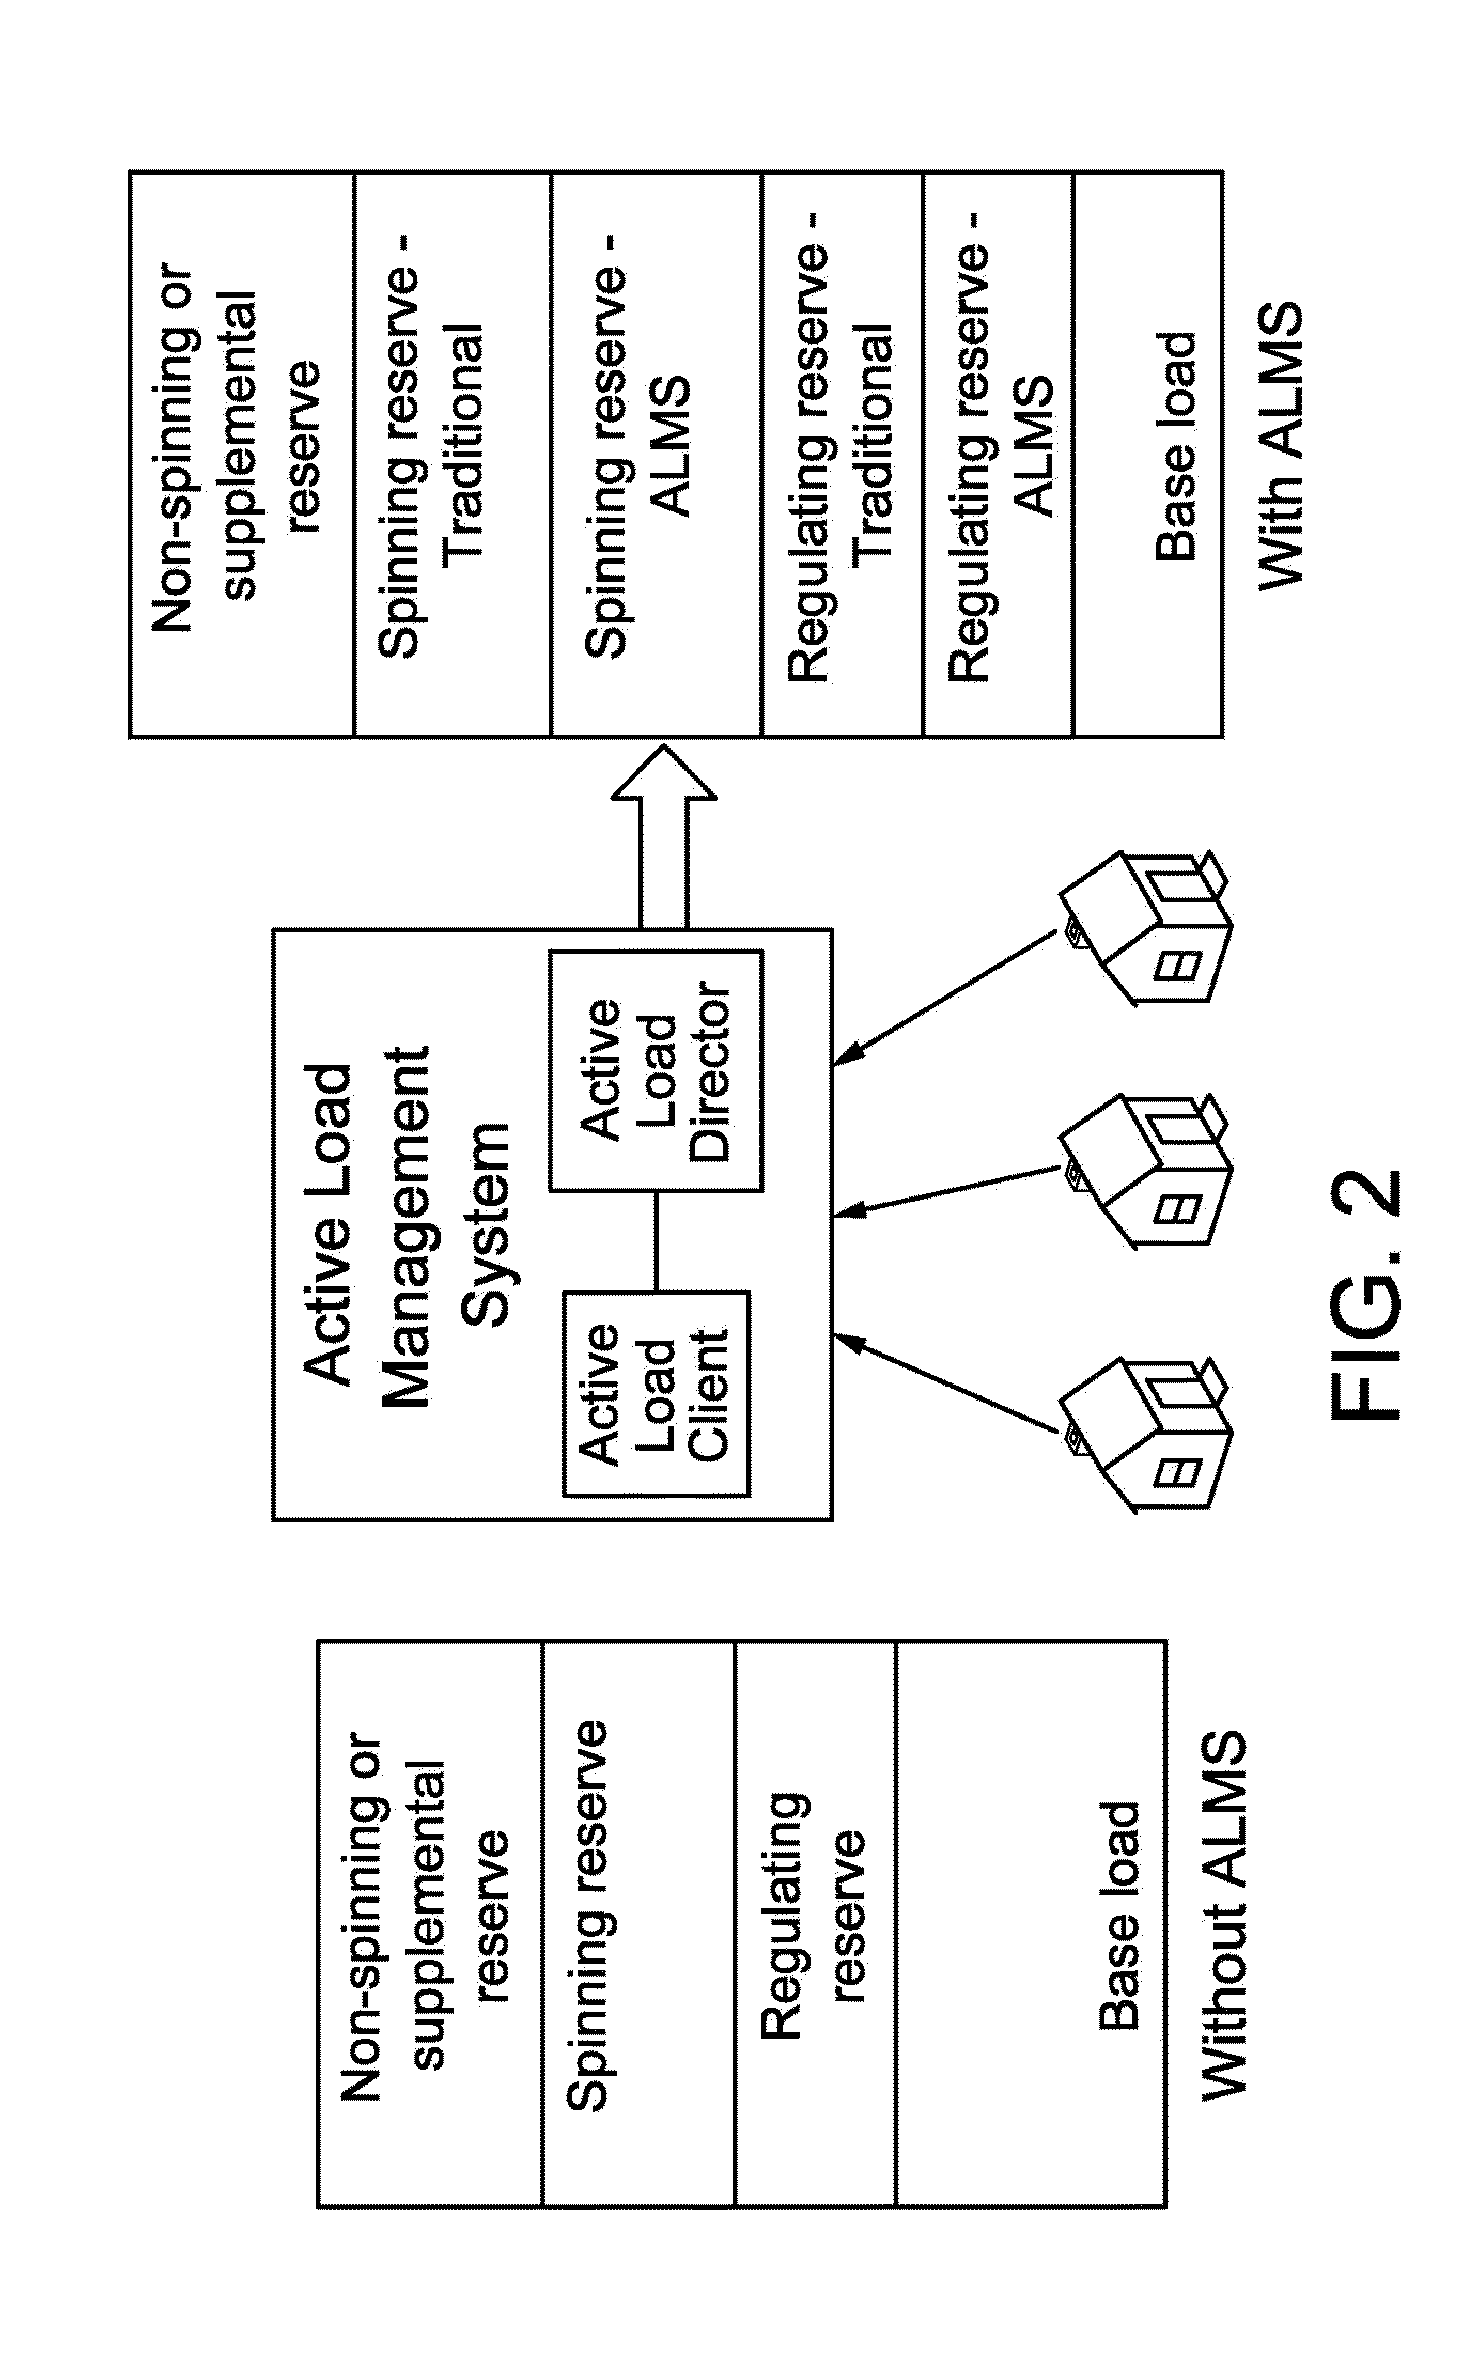 System and method for generating and providing dispatchable operating reserve energy capacity through use of active load management